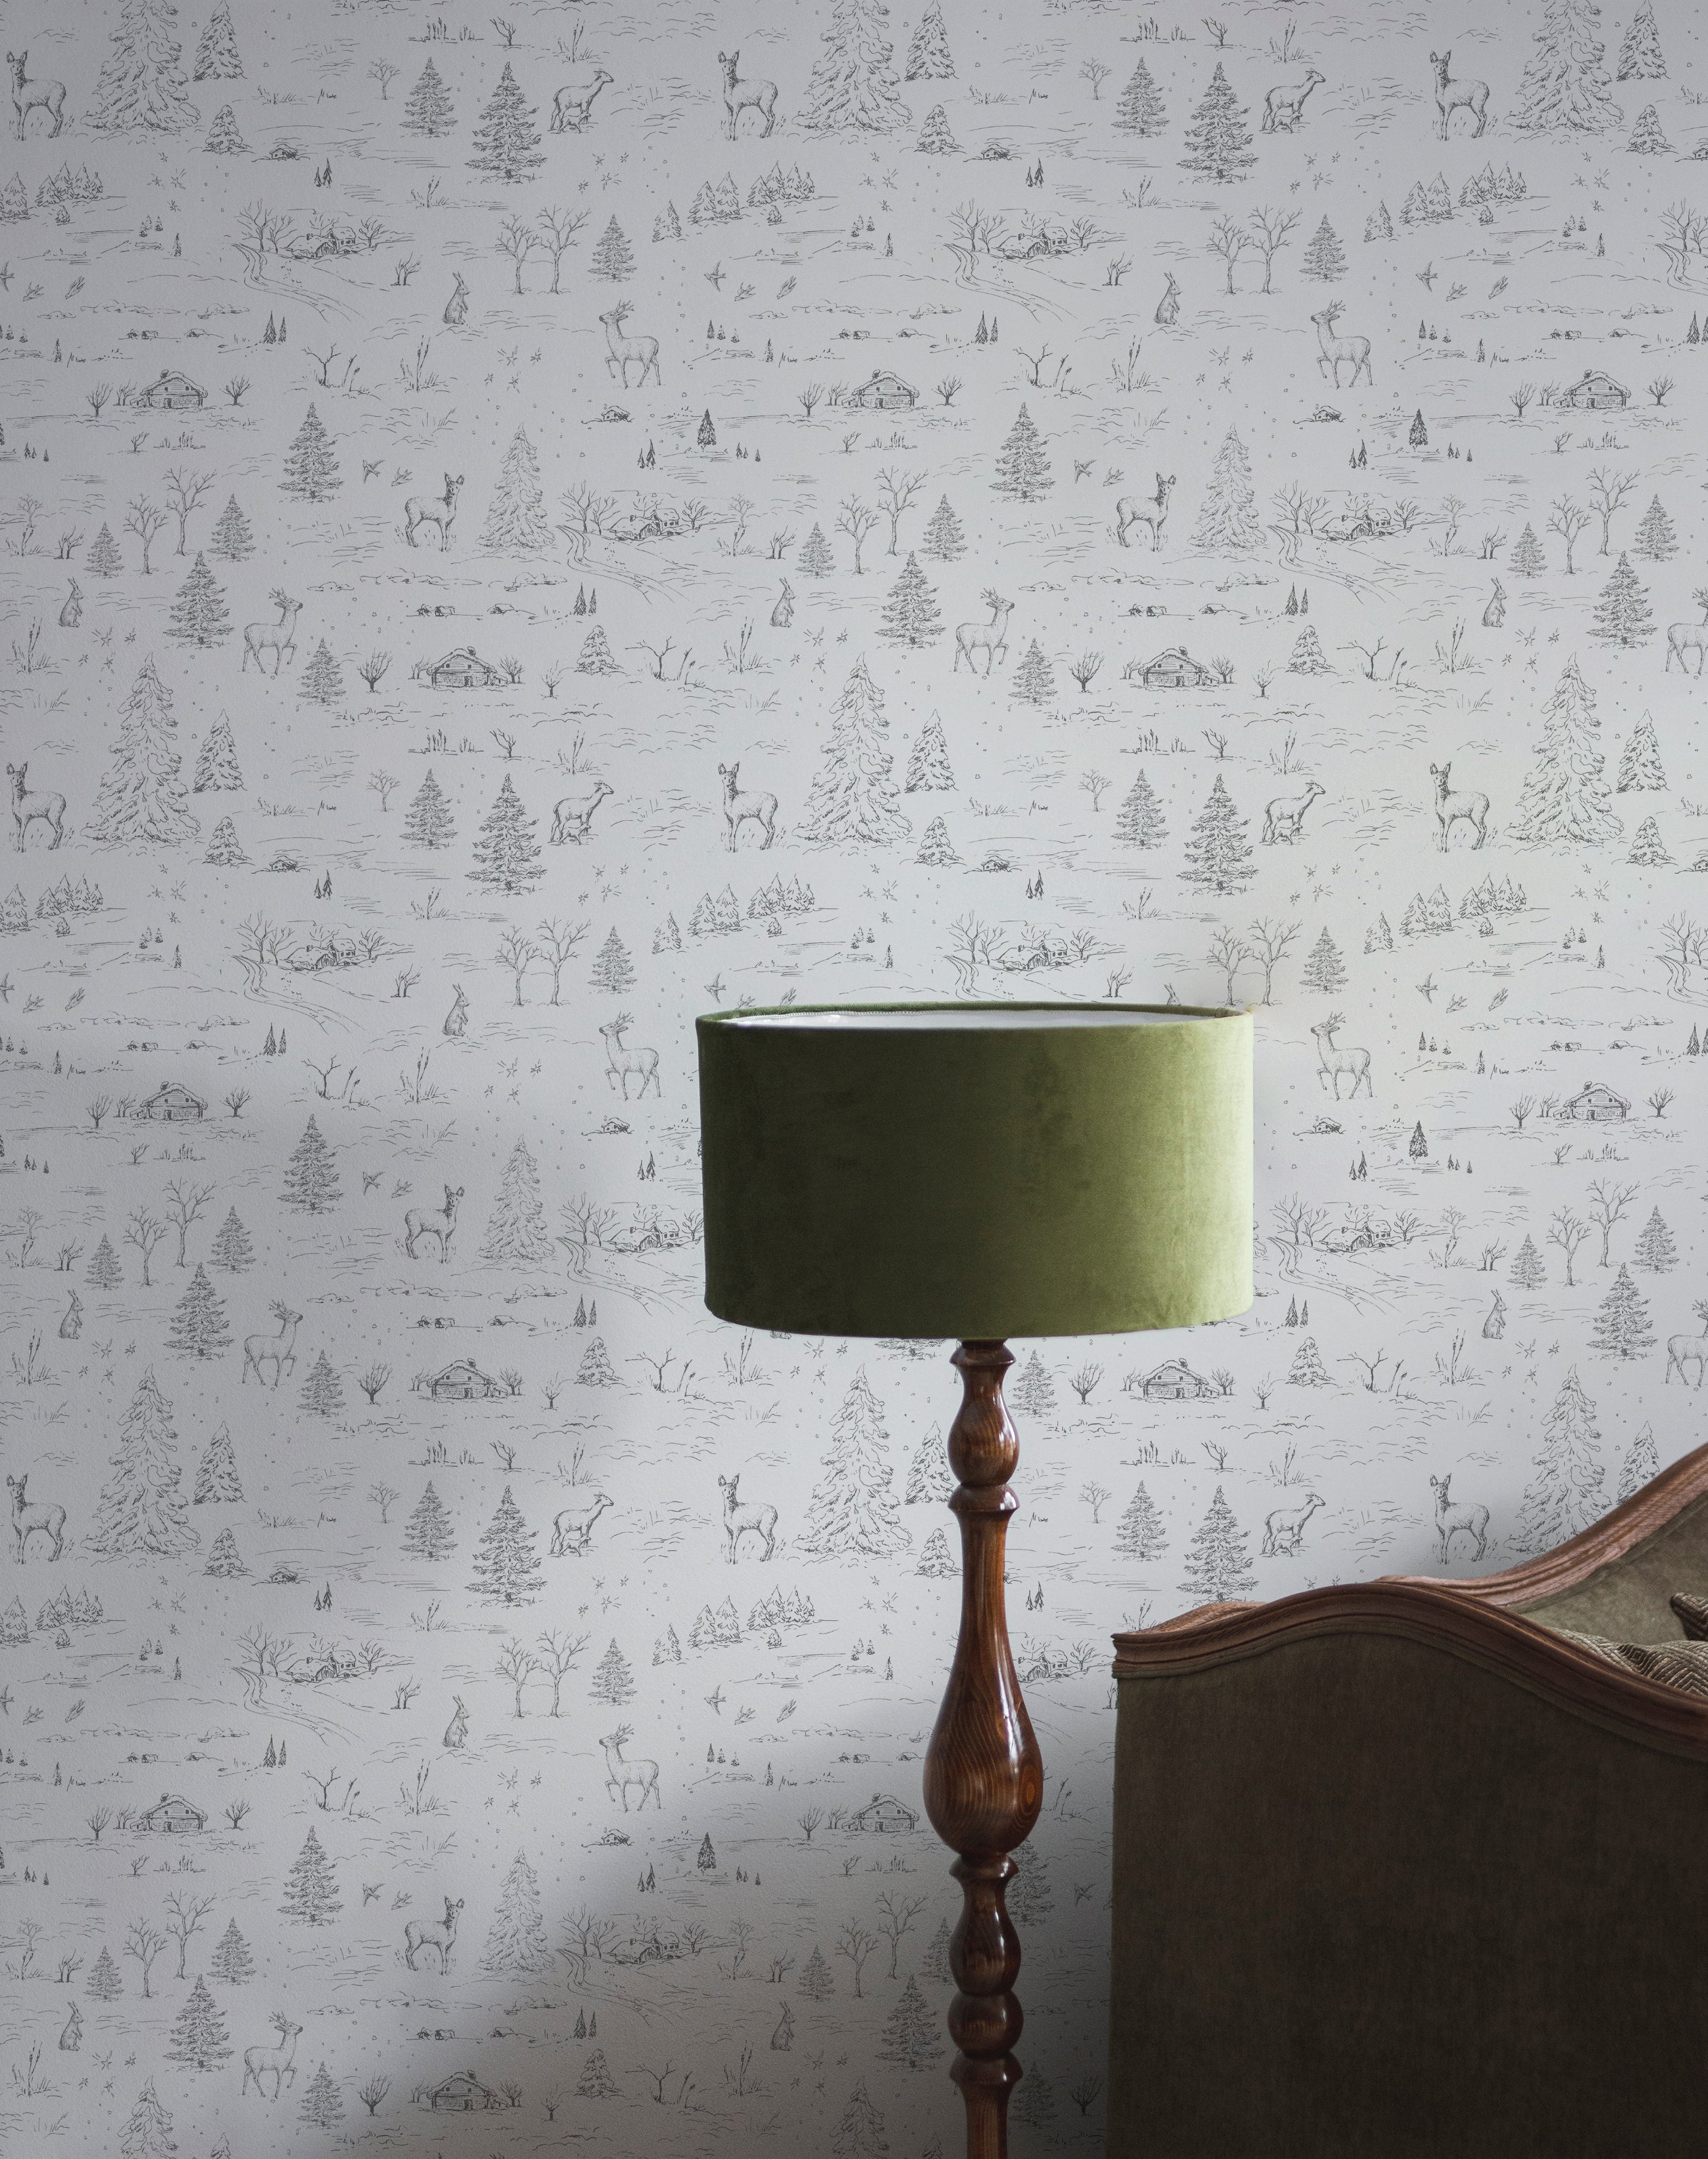 A chic room corner featuring a wall adorned with a winter wildlife sketch wallpaper, displaying intricate scenes of deer, trees, and cabins in a charming monochrome style, complemented by an elegant, vintage floor lamp with a green shade